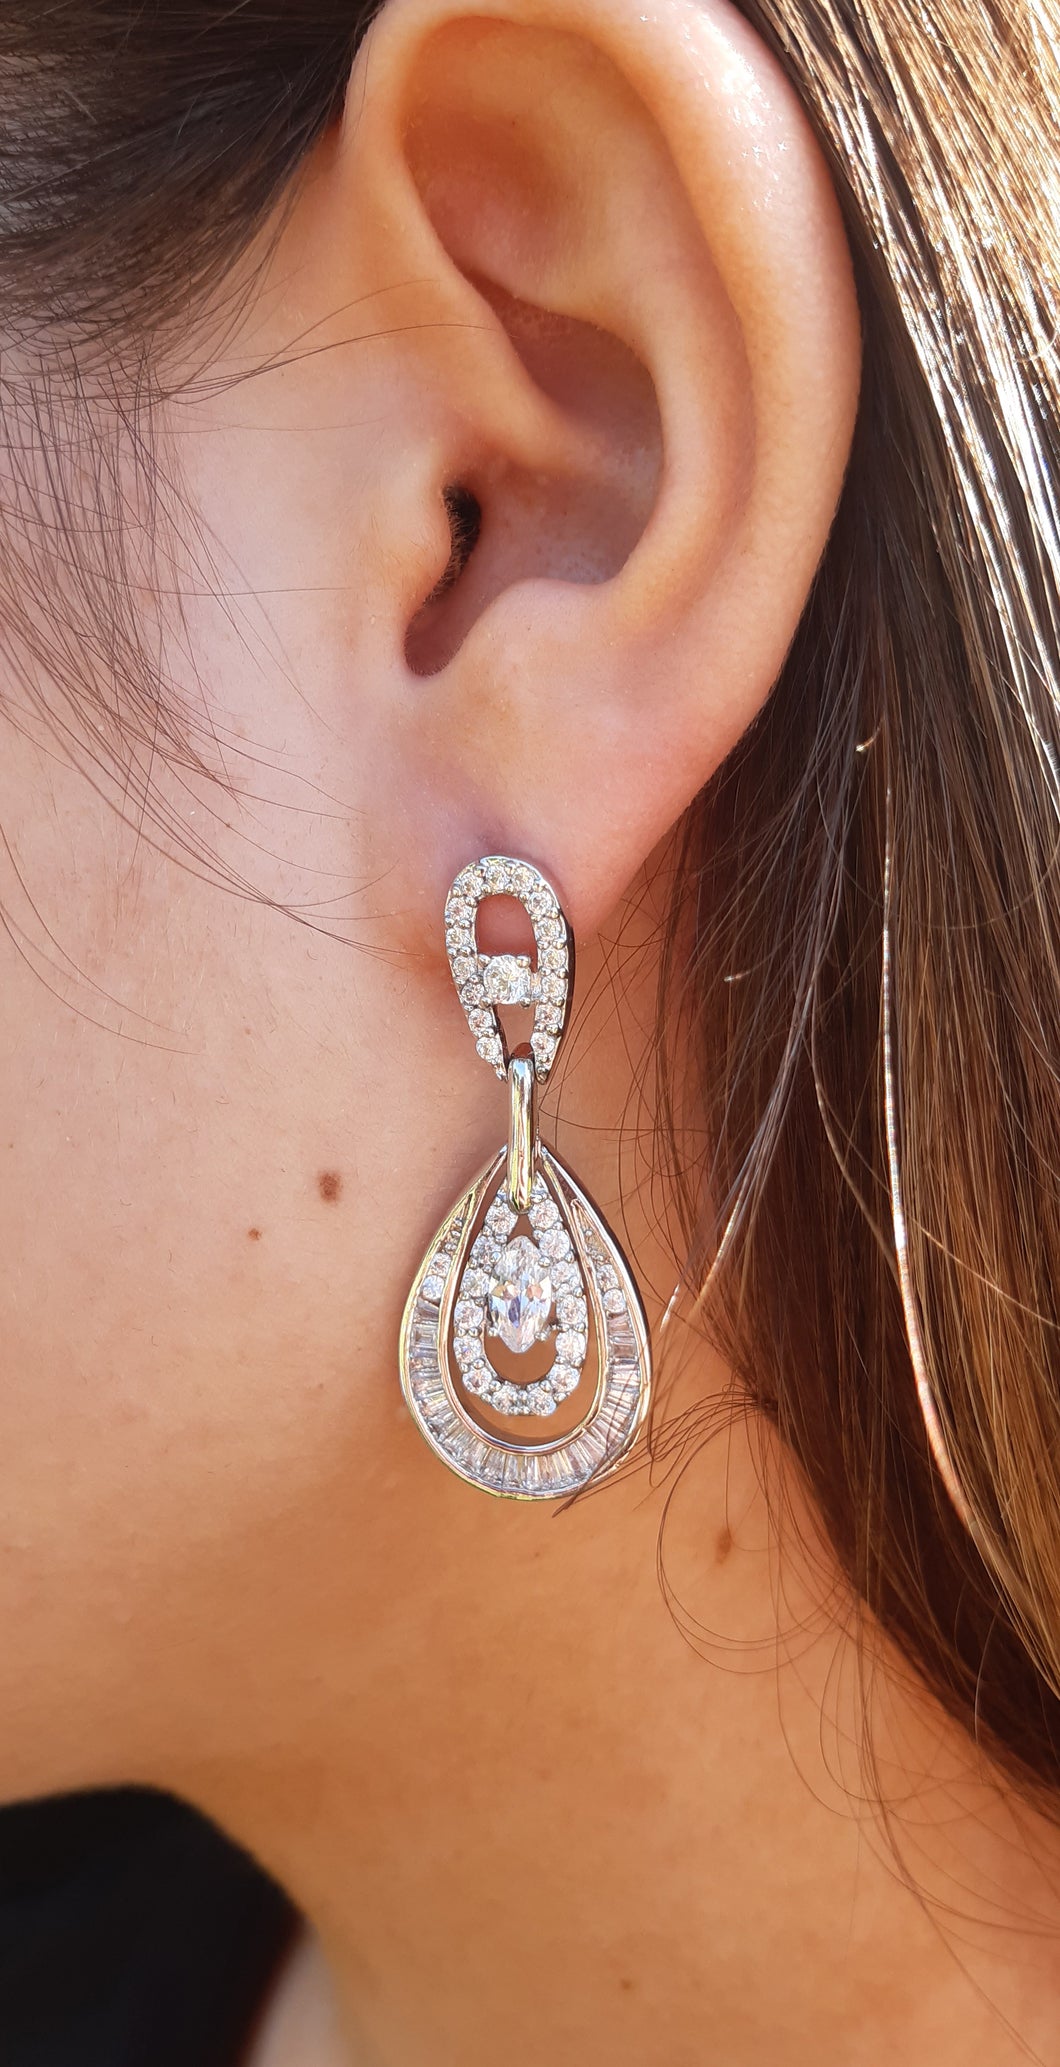 Drop style with varied stone detail in hoops